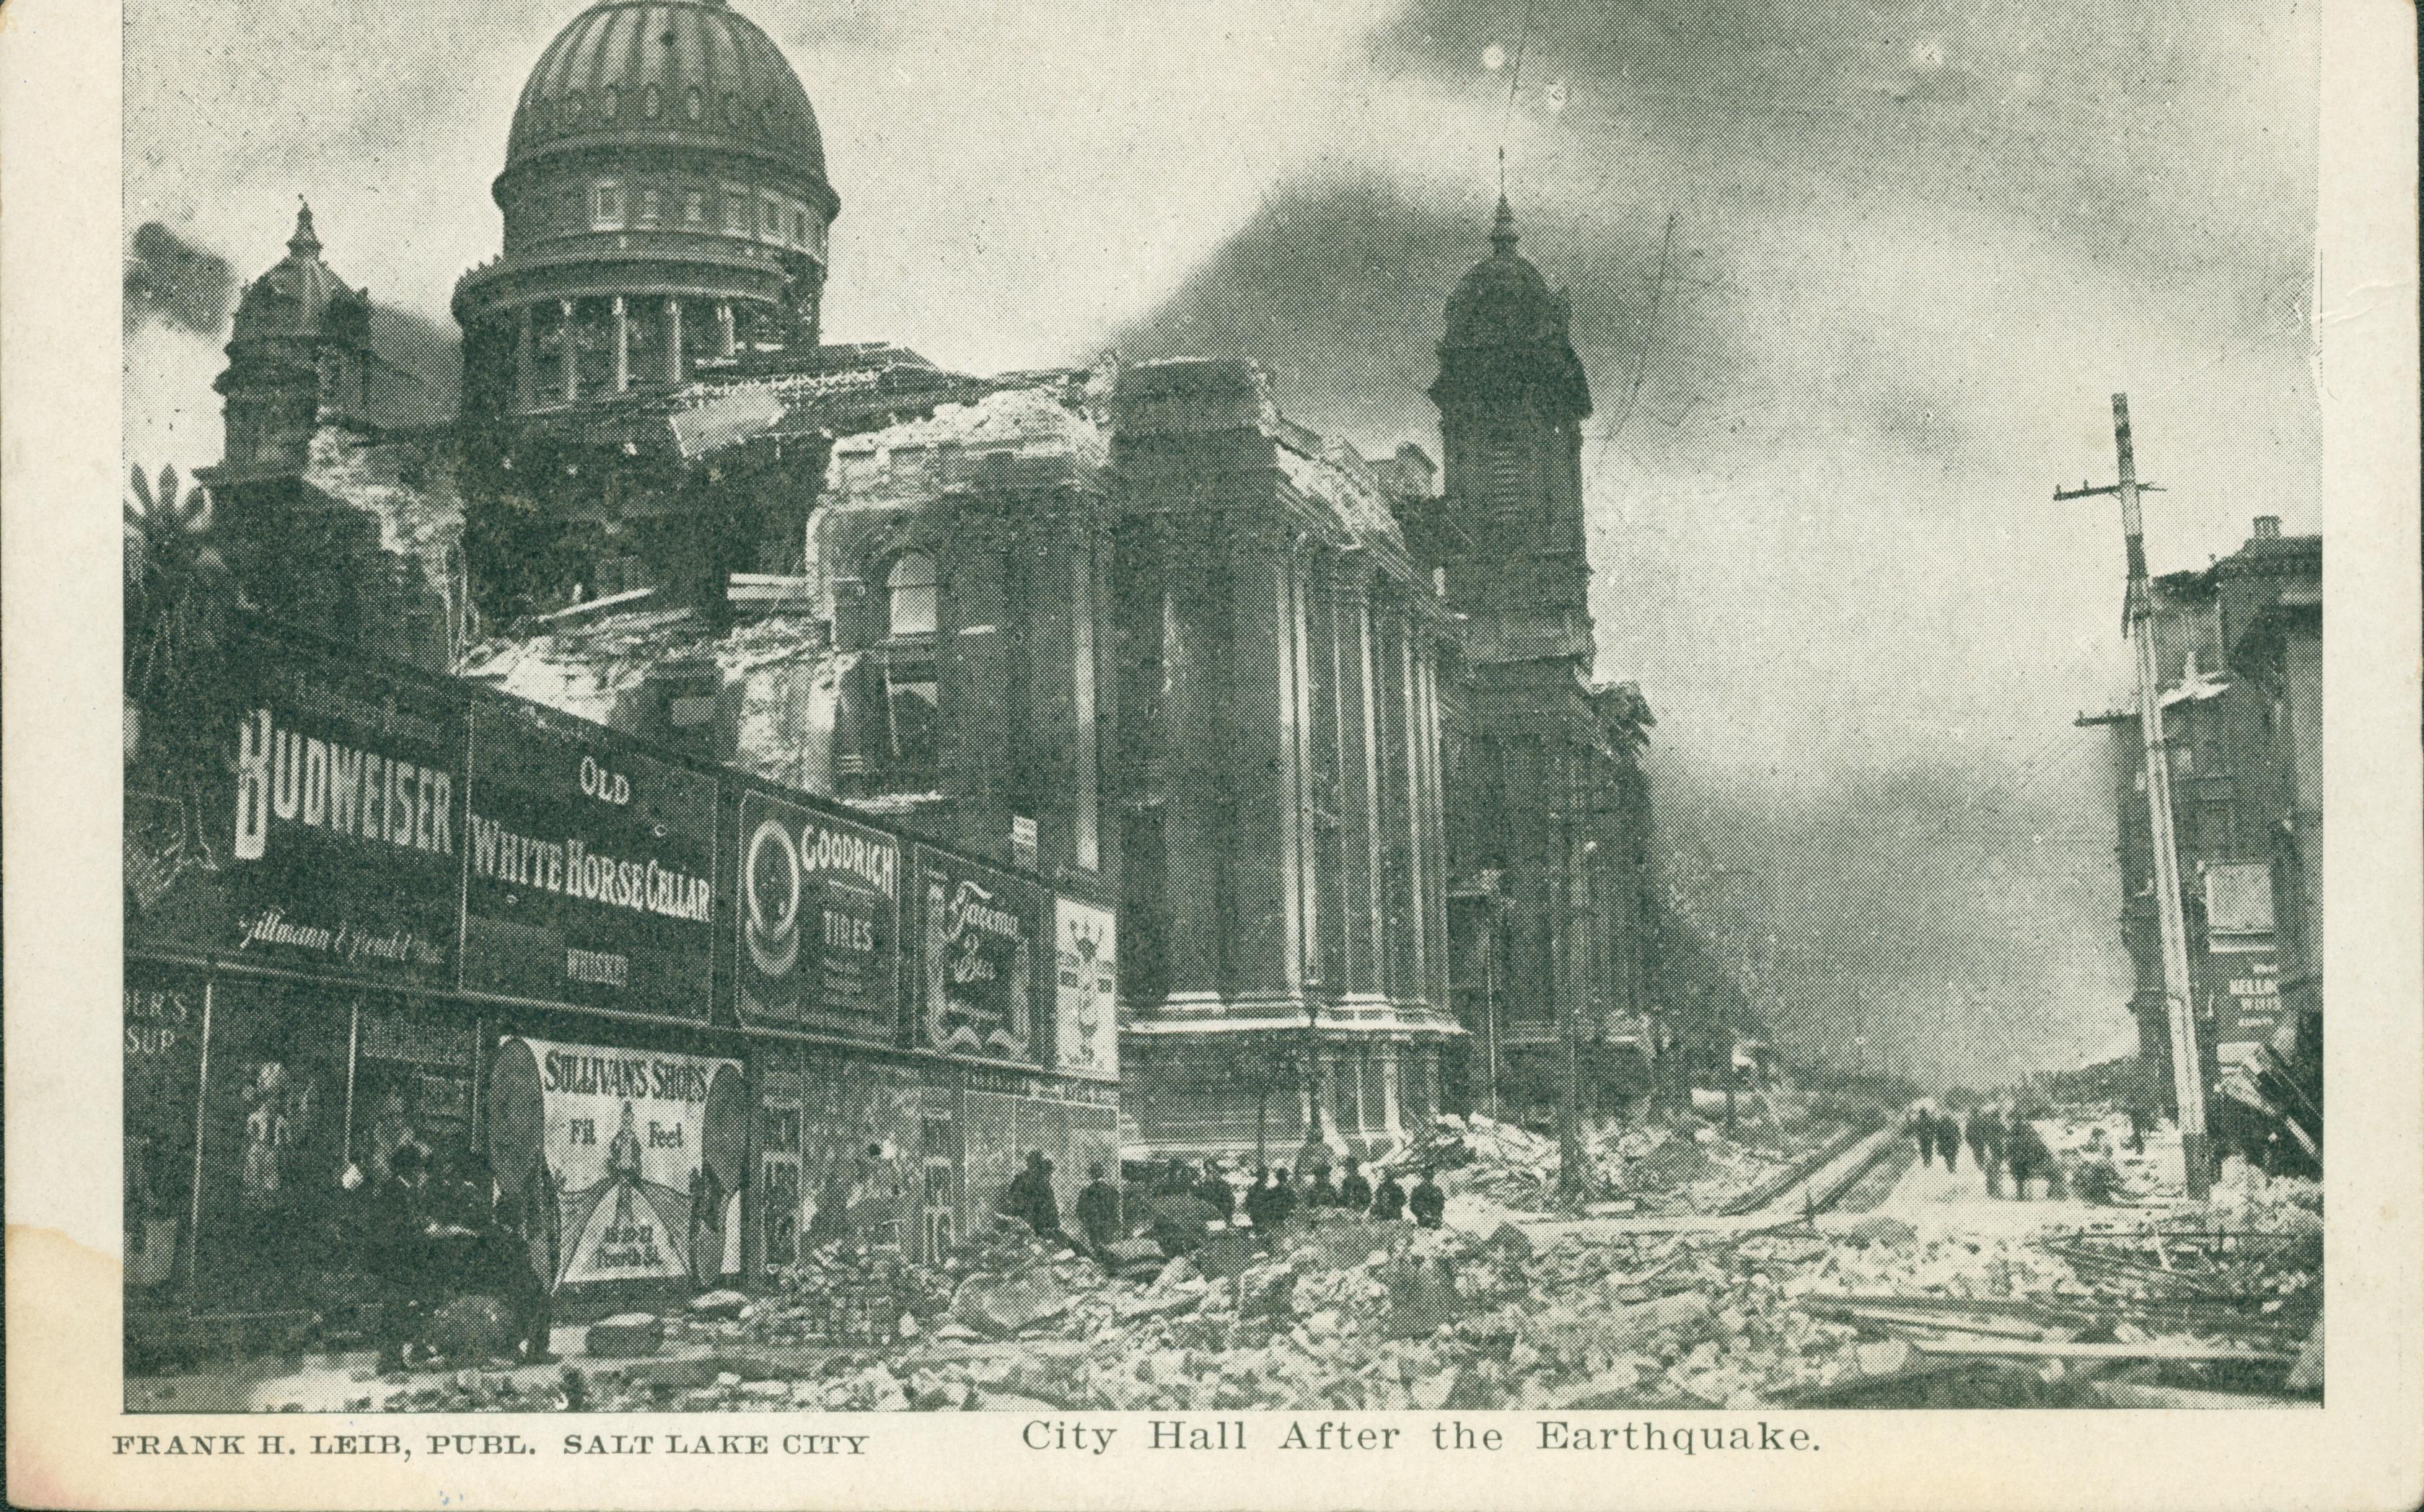 Photo showing the destruction of City Hall, surrounded by rubble.